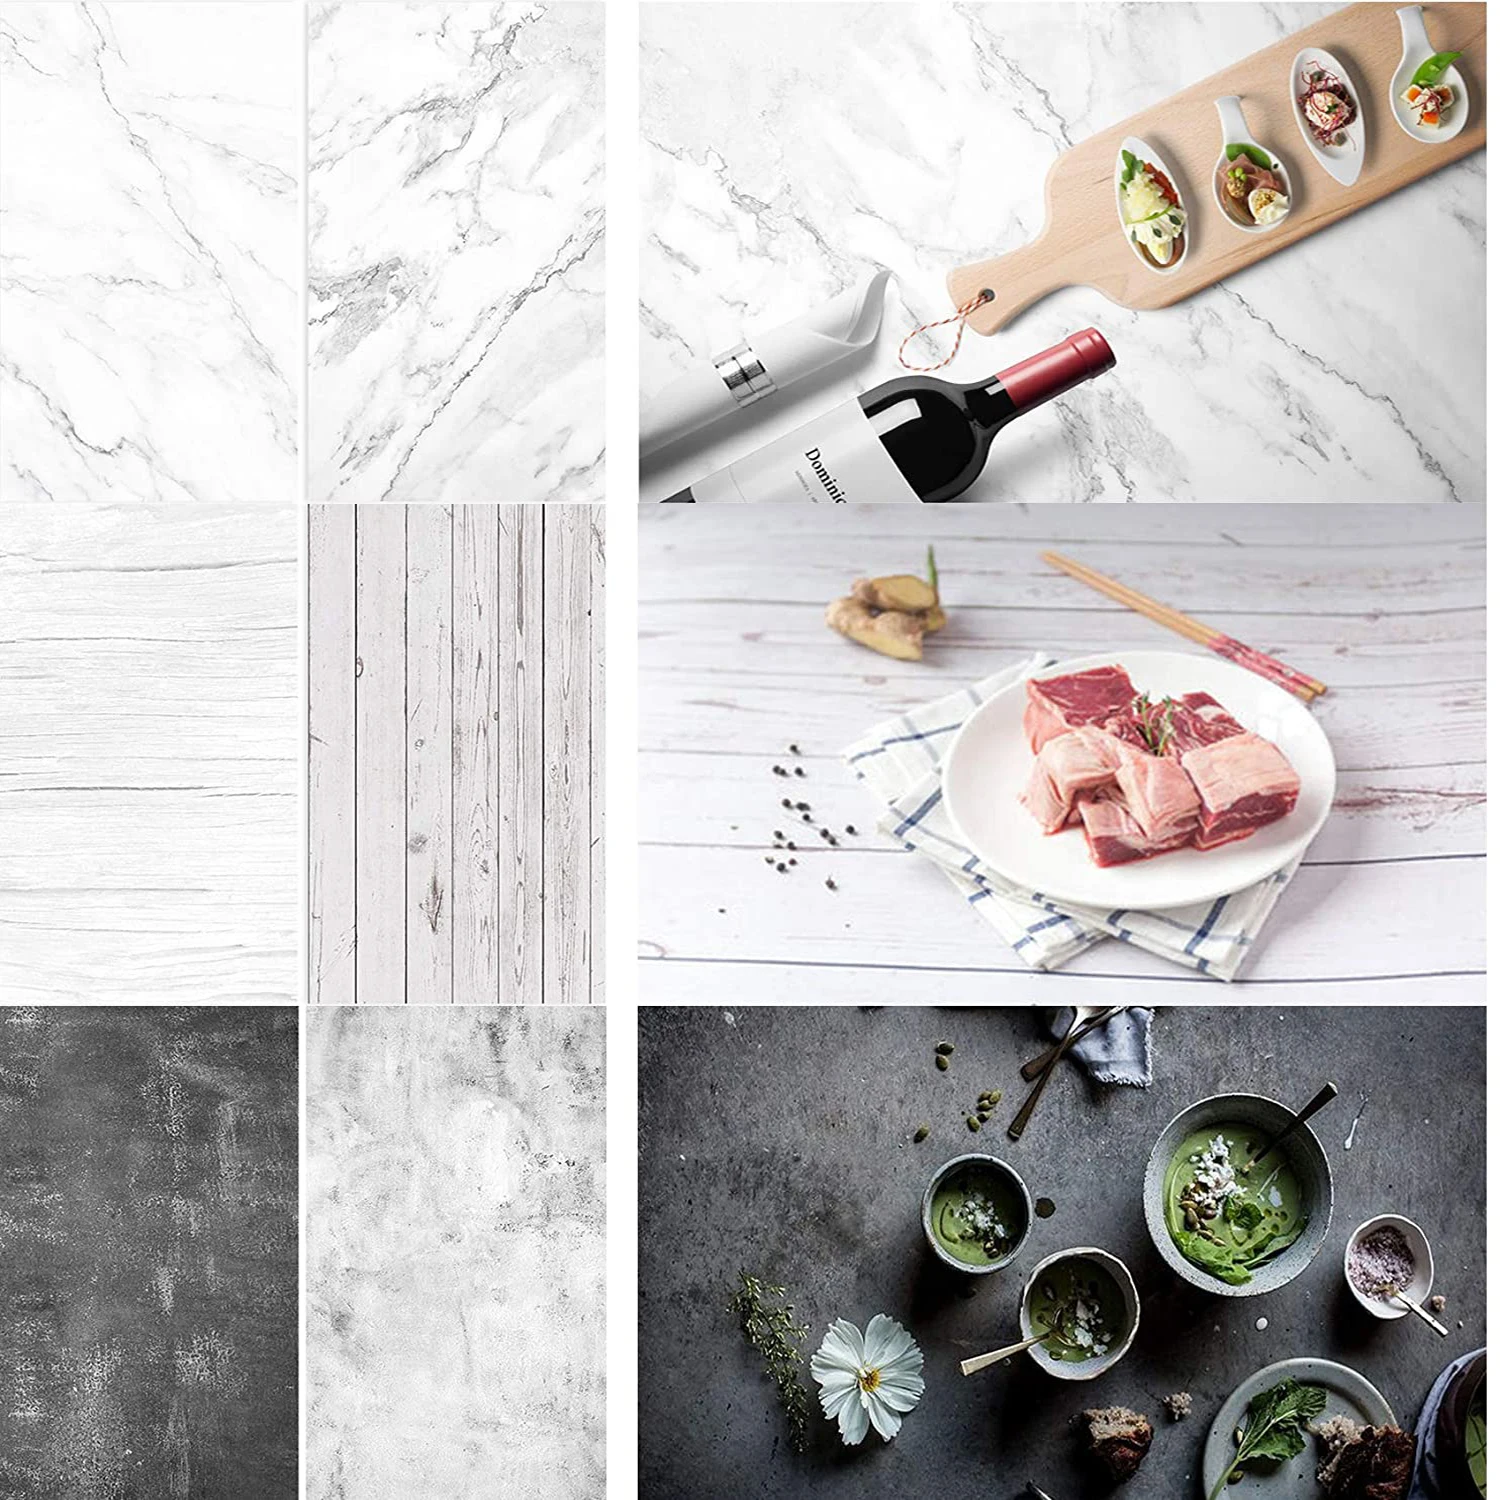 57*87cm Photography Background Paper Vinta Grain Marble 2 Sided Flat Lay Photo Backdrops for Food Jewelry Cosmetic